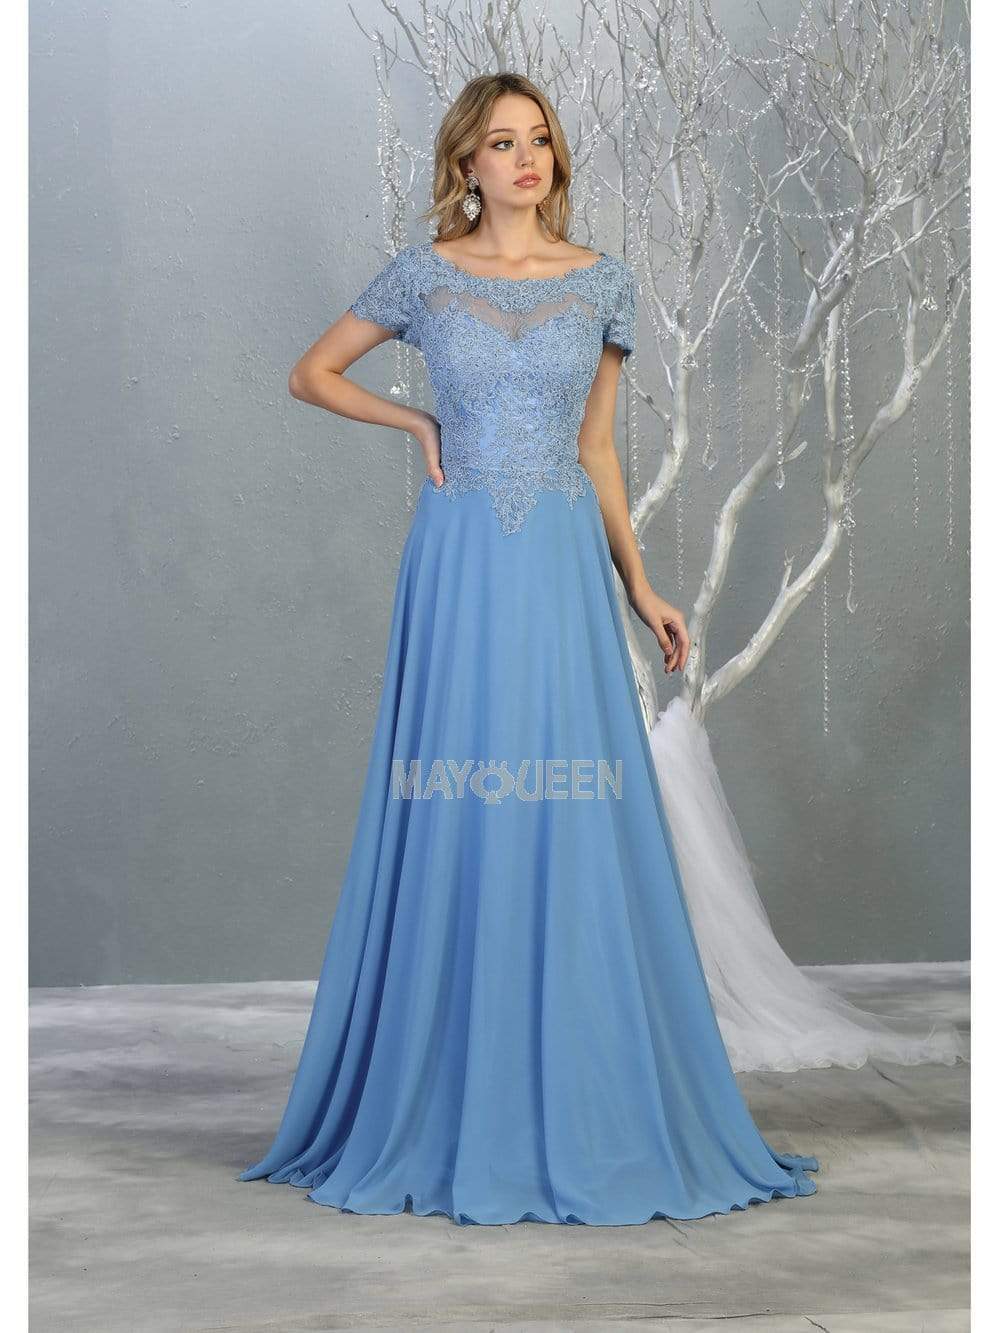 May Queen - MQ1763 Short Sleeve Jeweled Applique A-Line Dress Prom Dresses M / Perry Blue